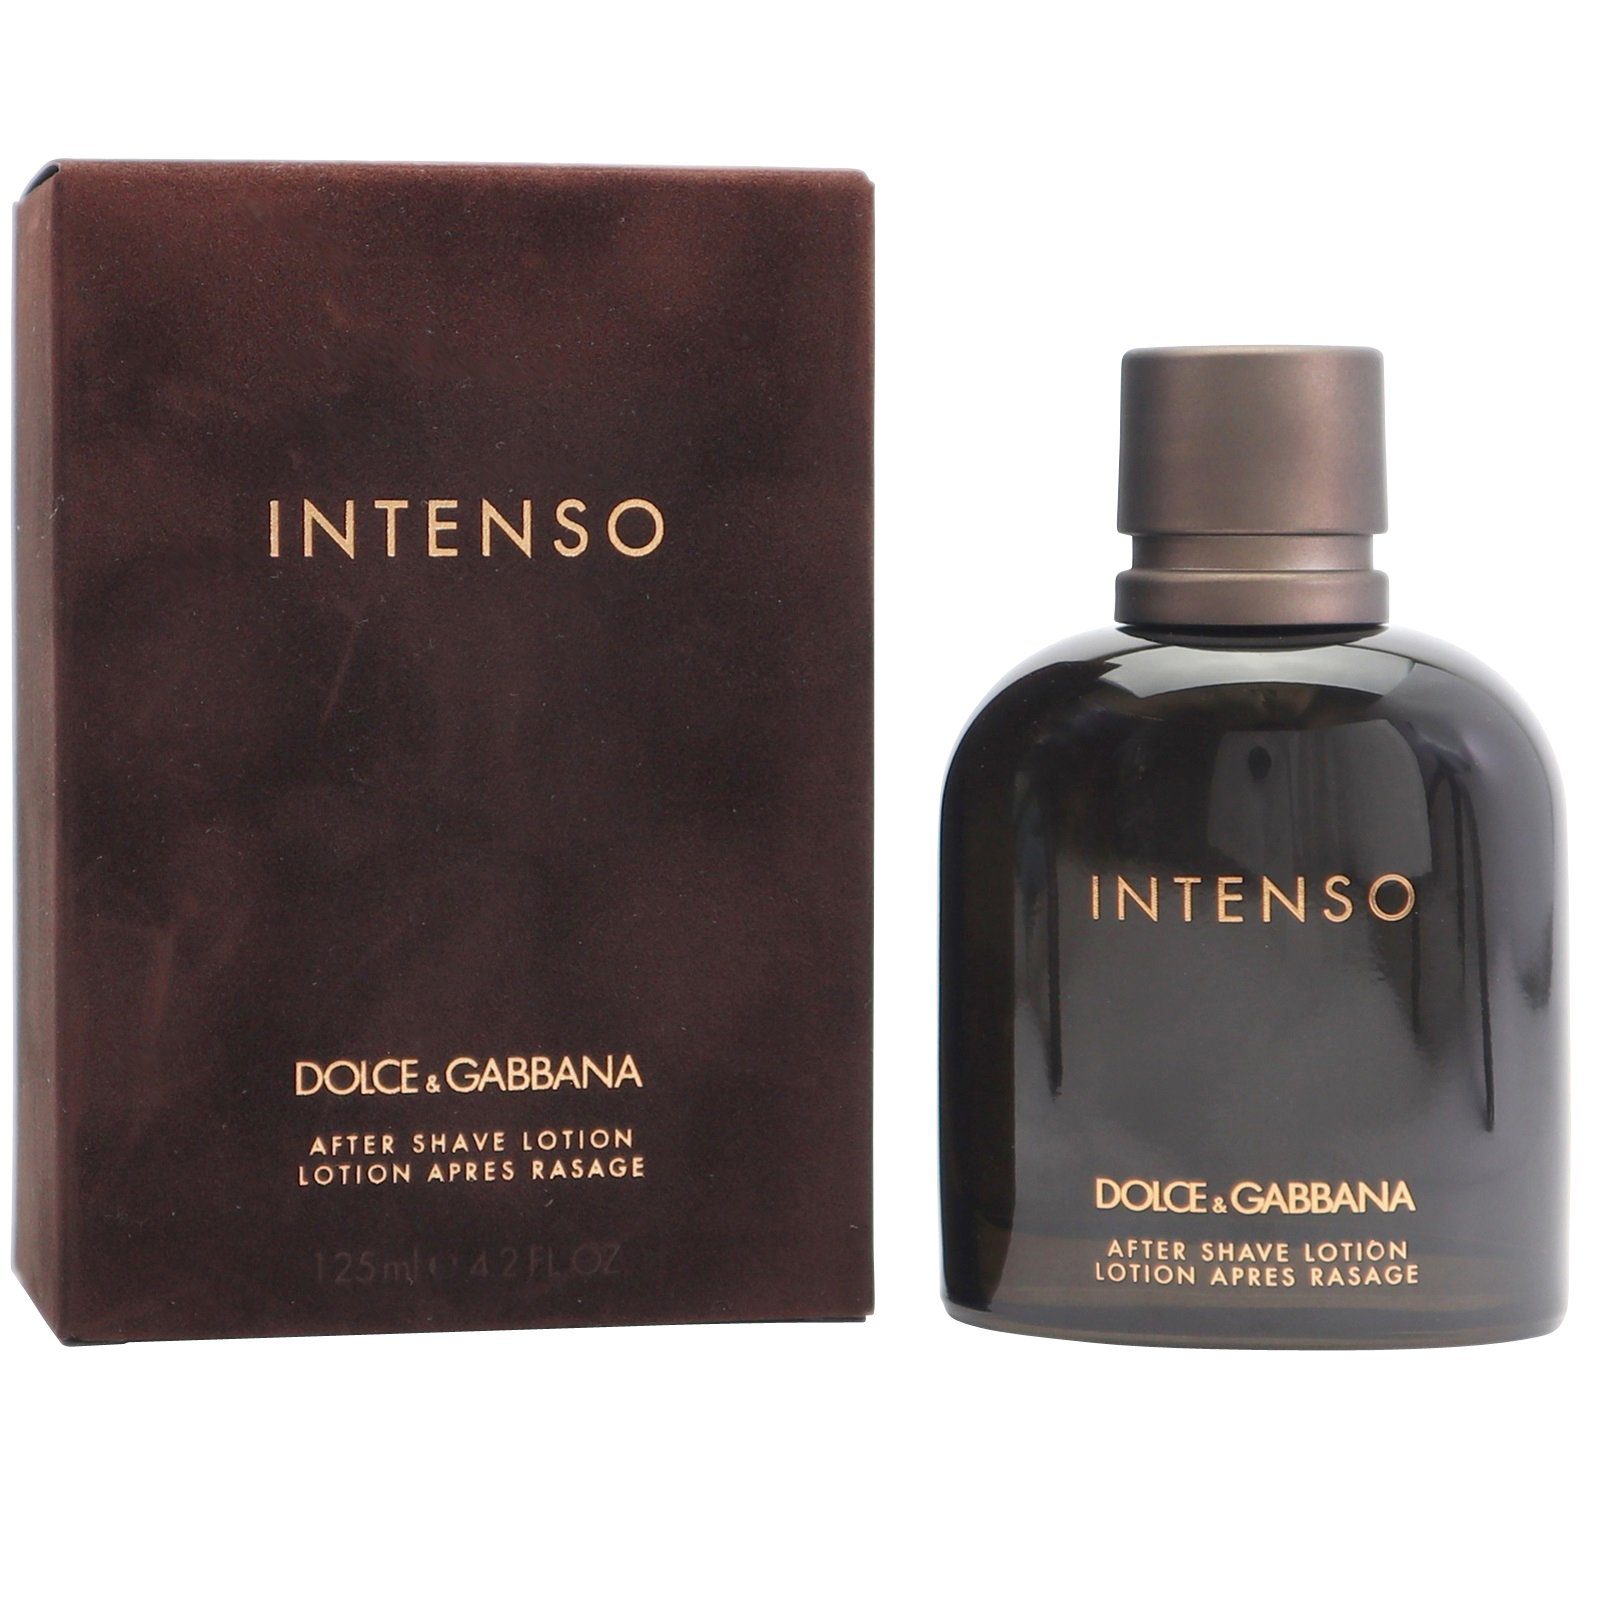 DOLCE & GABBANA After ml Lotion Intenso 125 Shave & Shave Gabbana Dolce After D&G Lotion